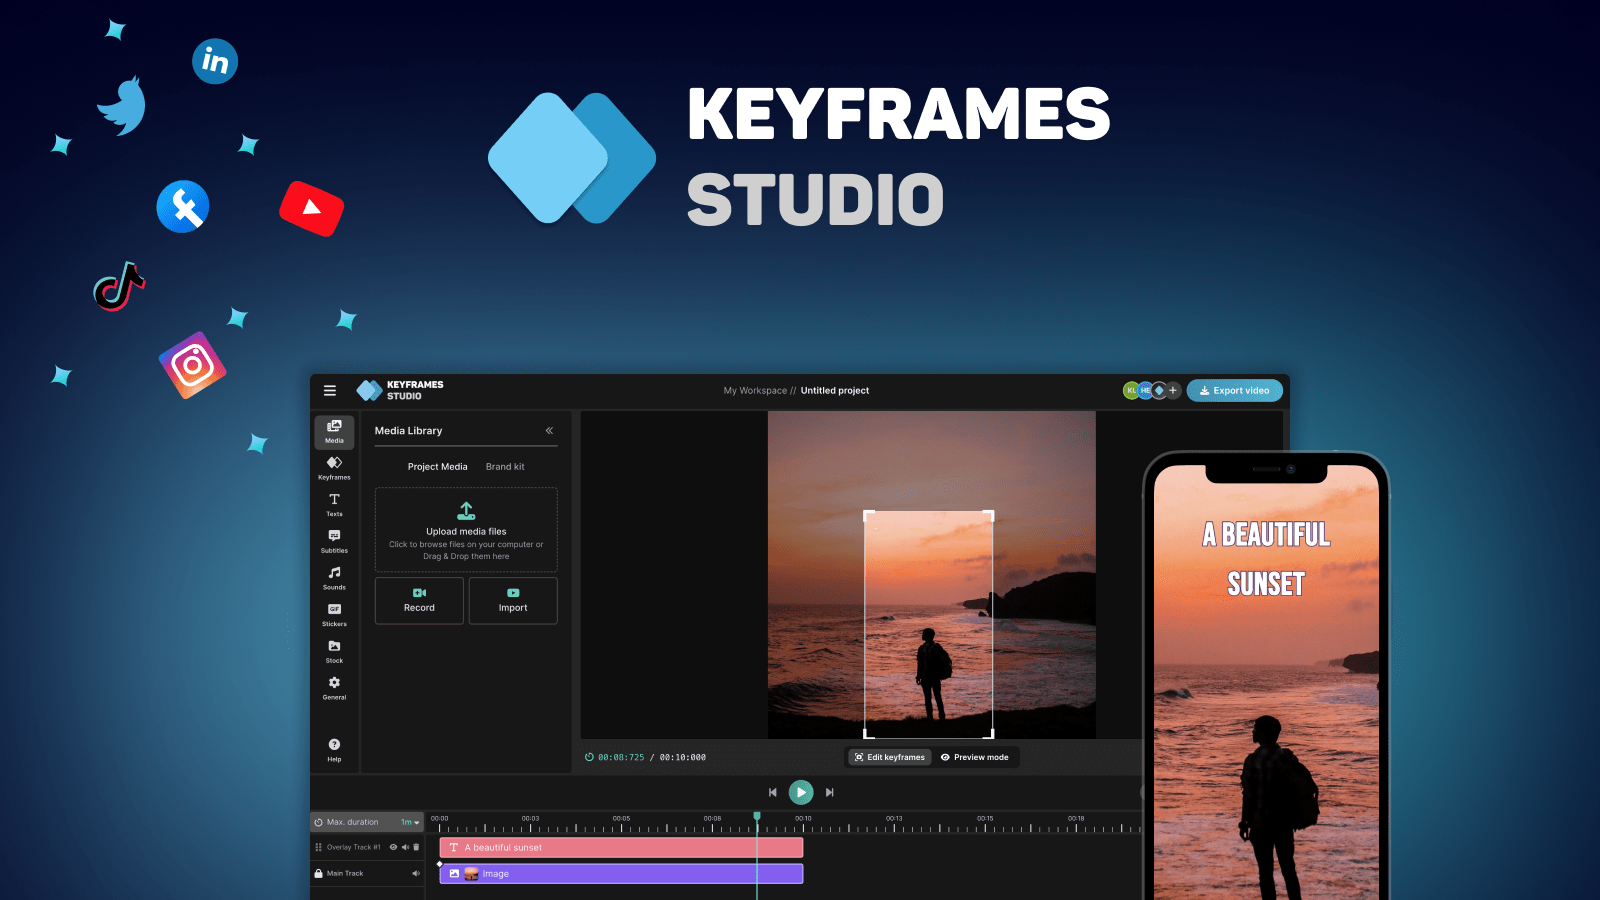 keyframes.studio - An all-in-one video editing platform for creating, editing, and sharing videos on social media